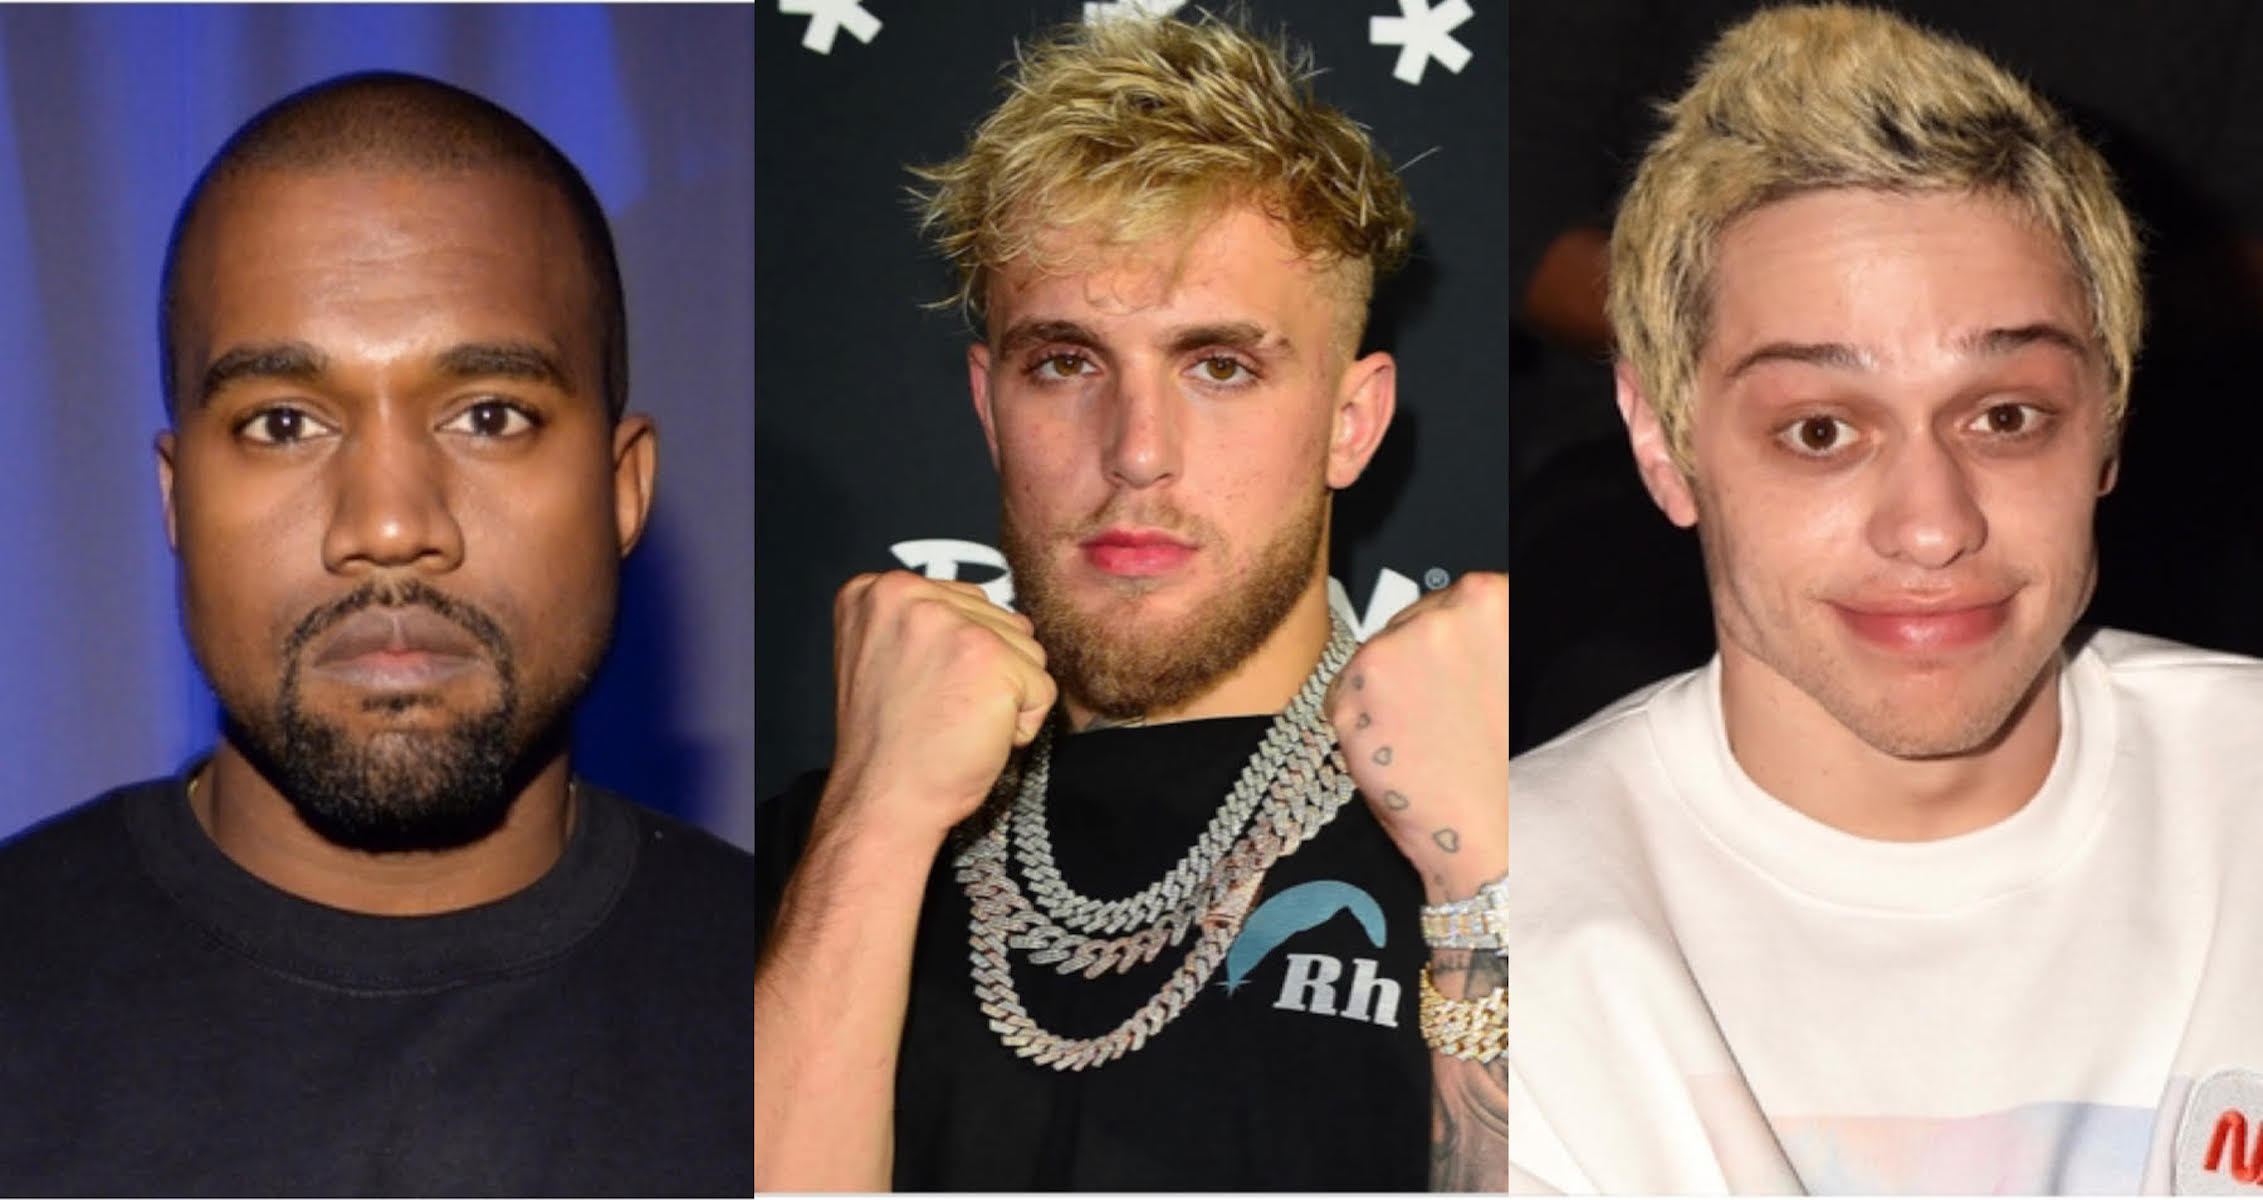 Jake Paul Offers to Setup $60 Million Boxing Match Between Kanye West And Pete Davidson